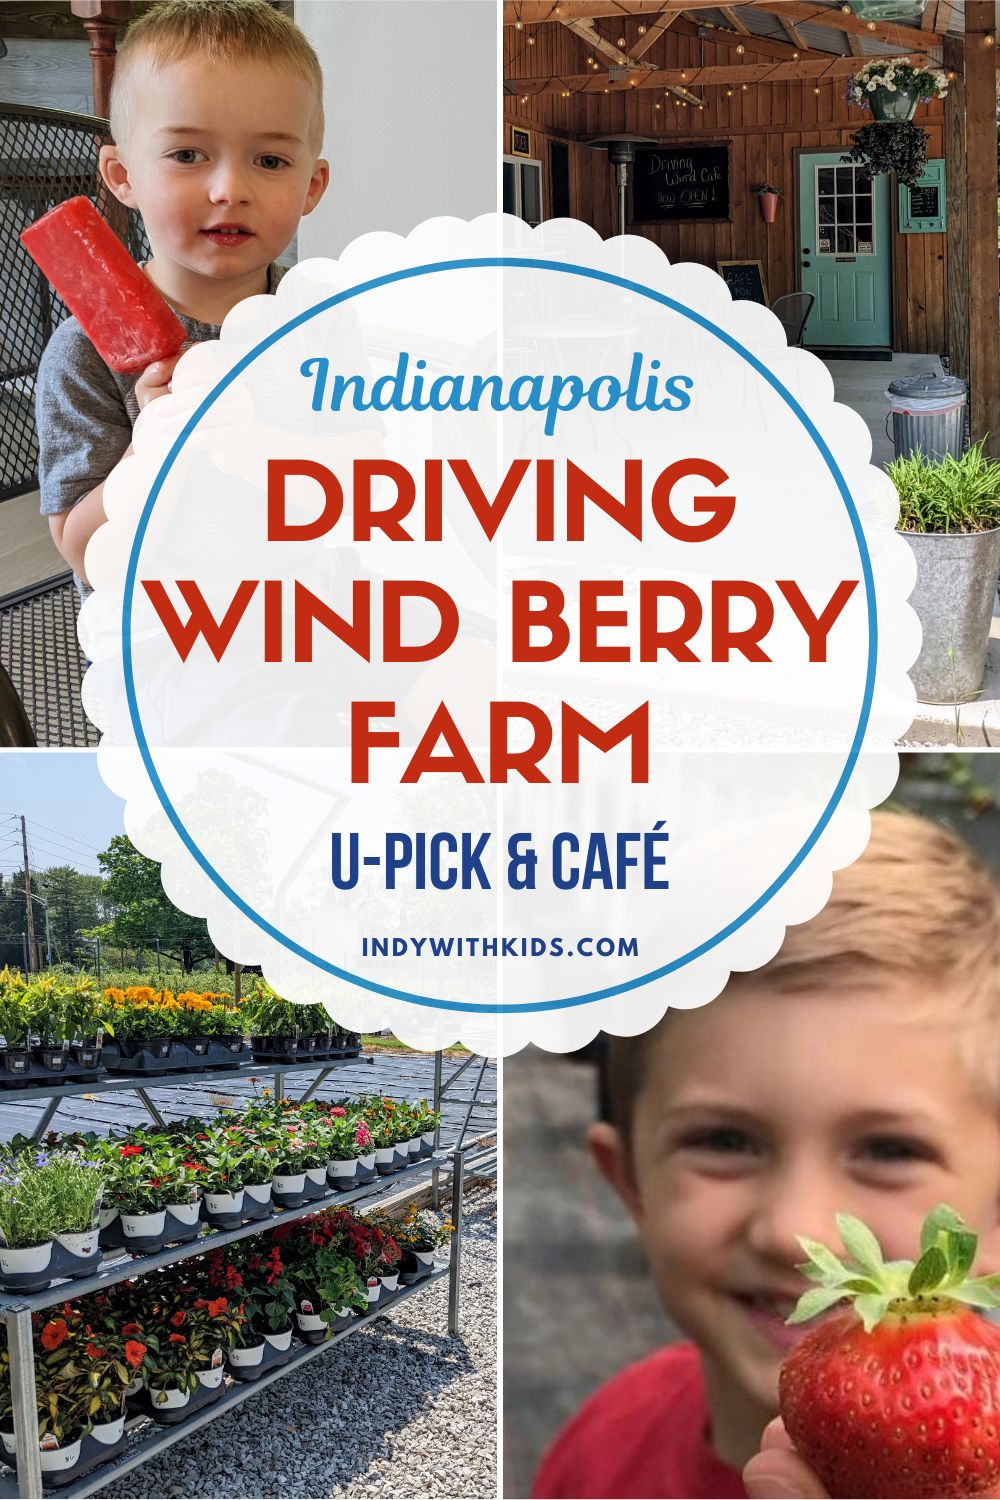 Driving Wind Berry Farm offers U-pick, a farm store, a cafe, and more!